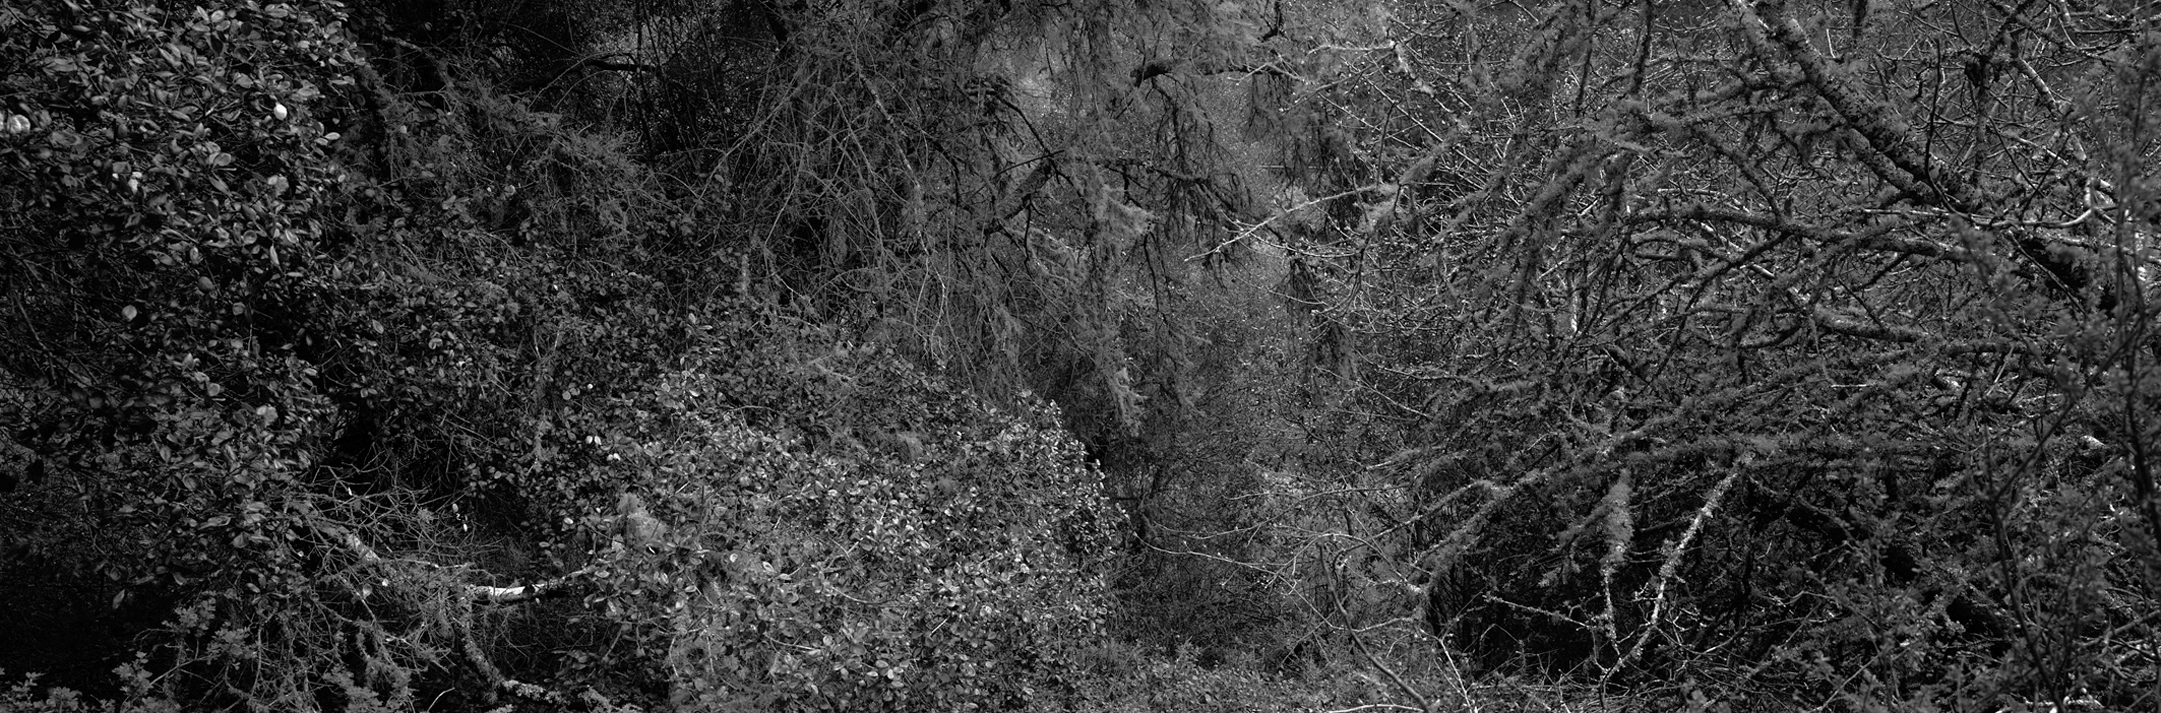 Christian Vogt, Naturräume IX, 2008
Pigmented ink on rag paper
110 x 290 cm
Edition of 3